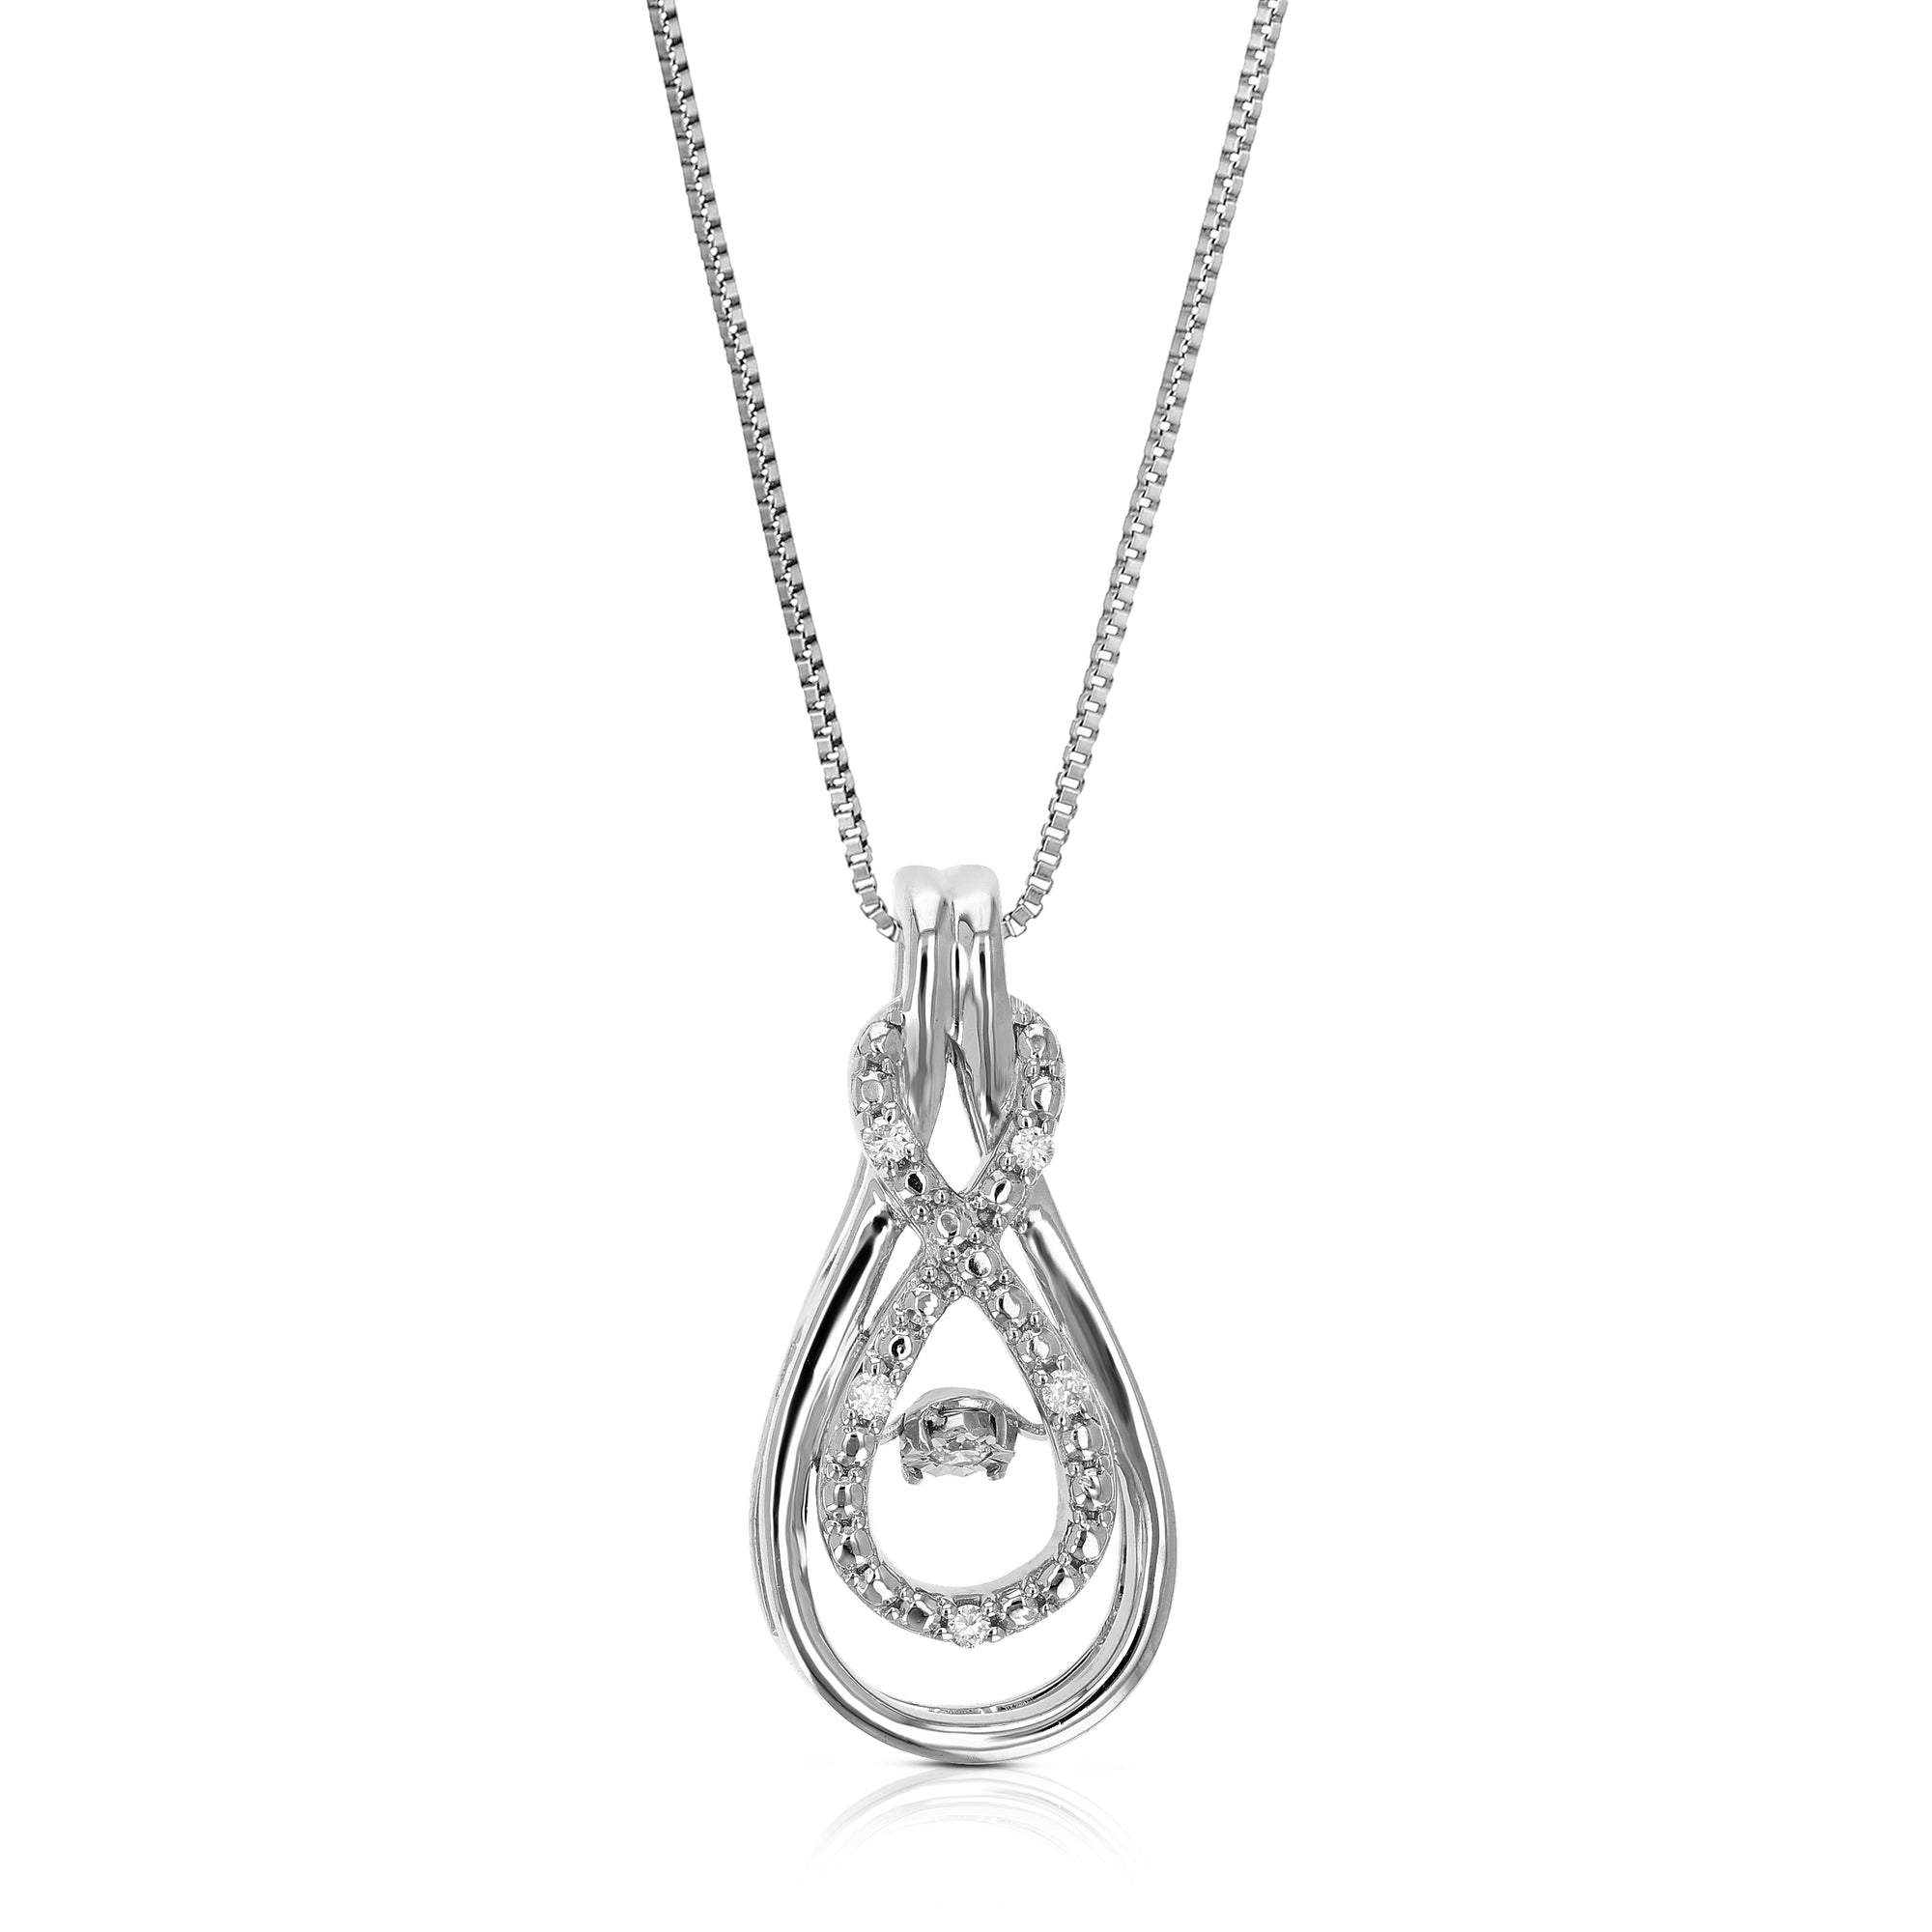 1/20 cttw Lab Grown Diamond Pendant Necklace .925 Sterling Silver Dancing Diamond 3/4 Inch with 18 Inch Chain, Size 3/4 Inch